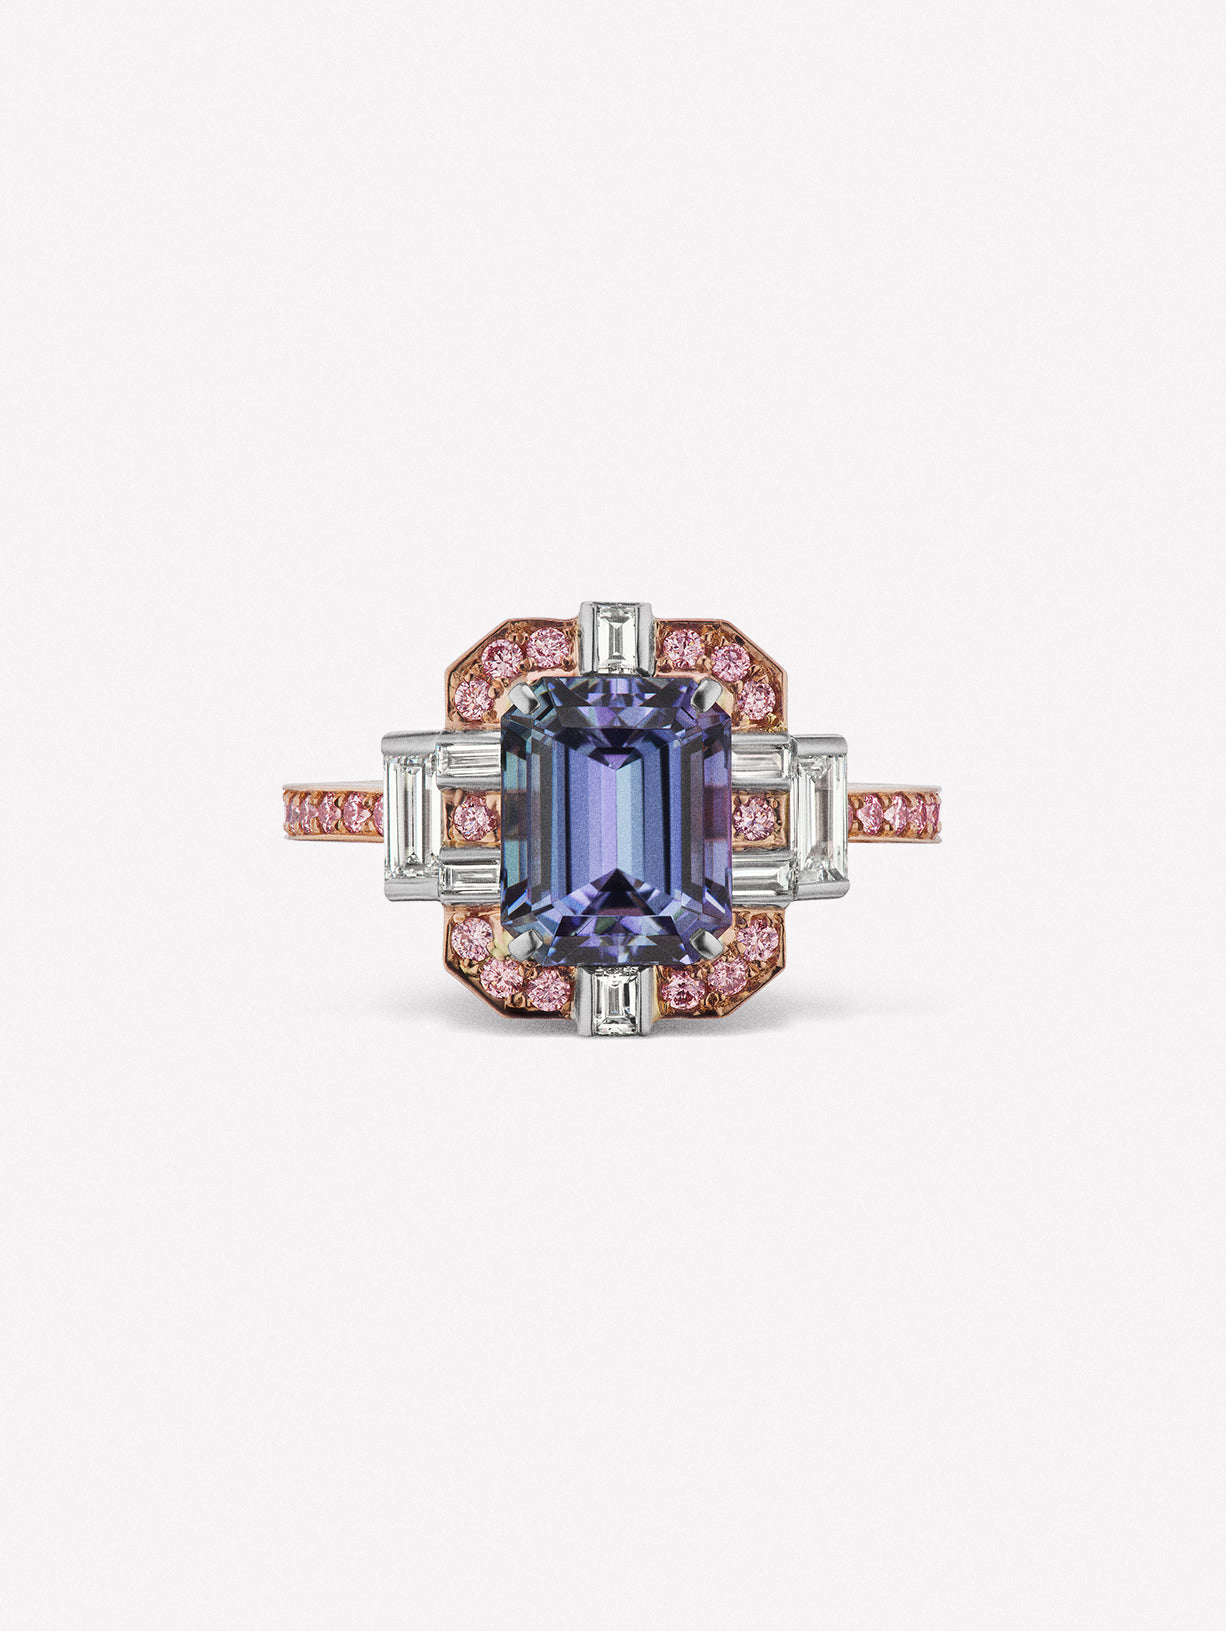 Pink Diamond ring with tanzanite center and white diamond baguette accents from J Fine